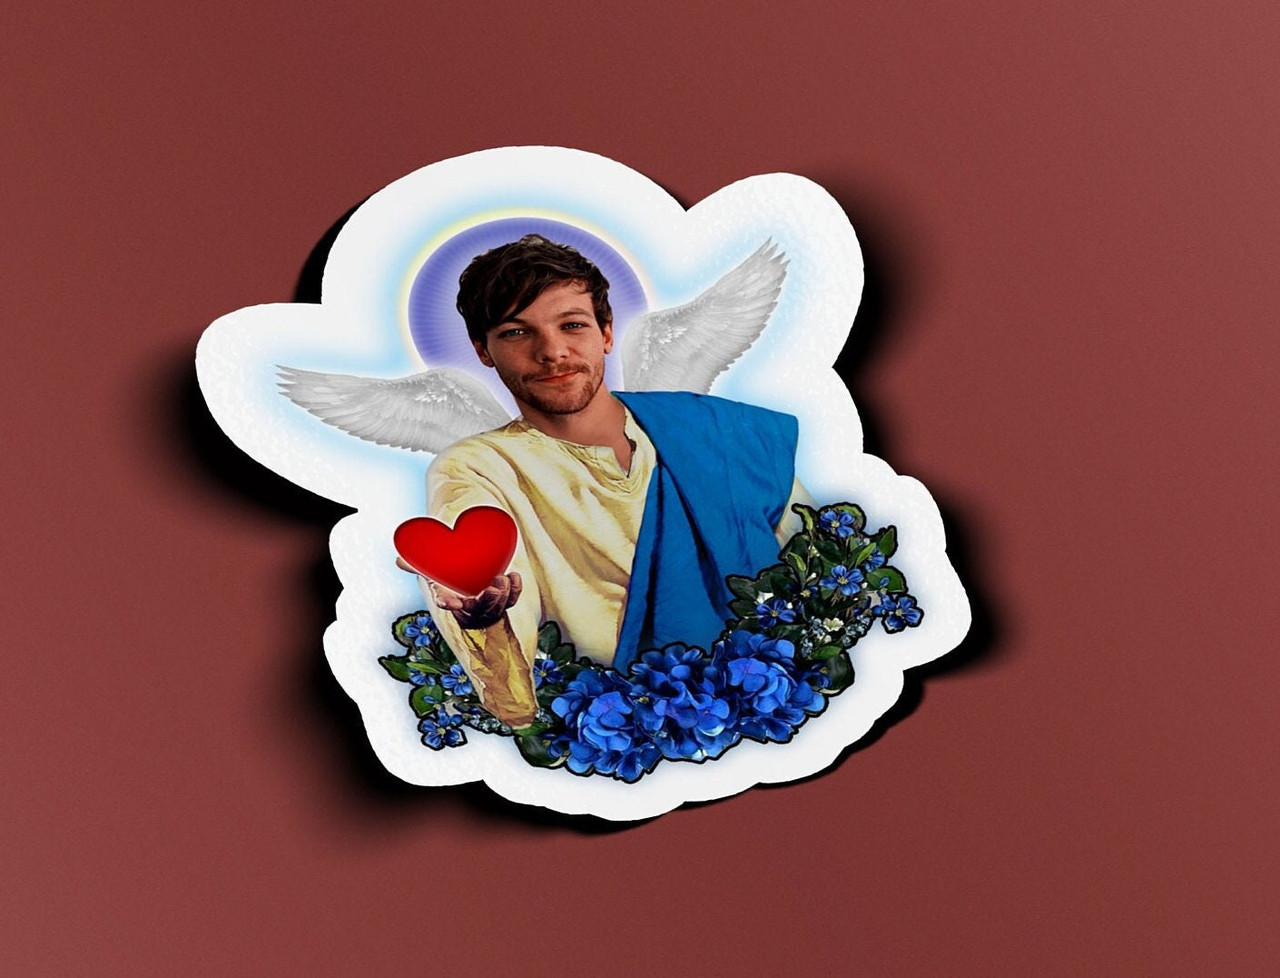 Louis Tomlinson Logo Stickers for Sale